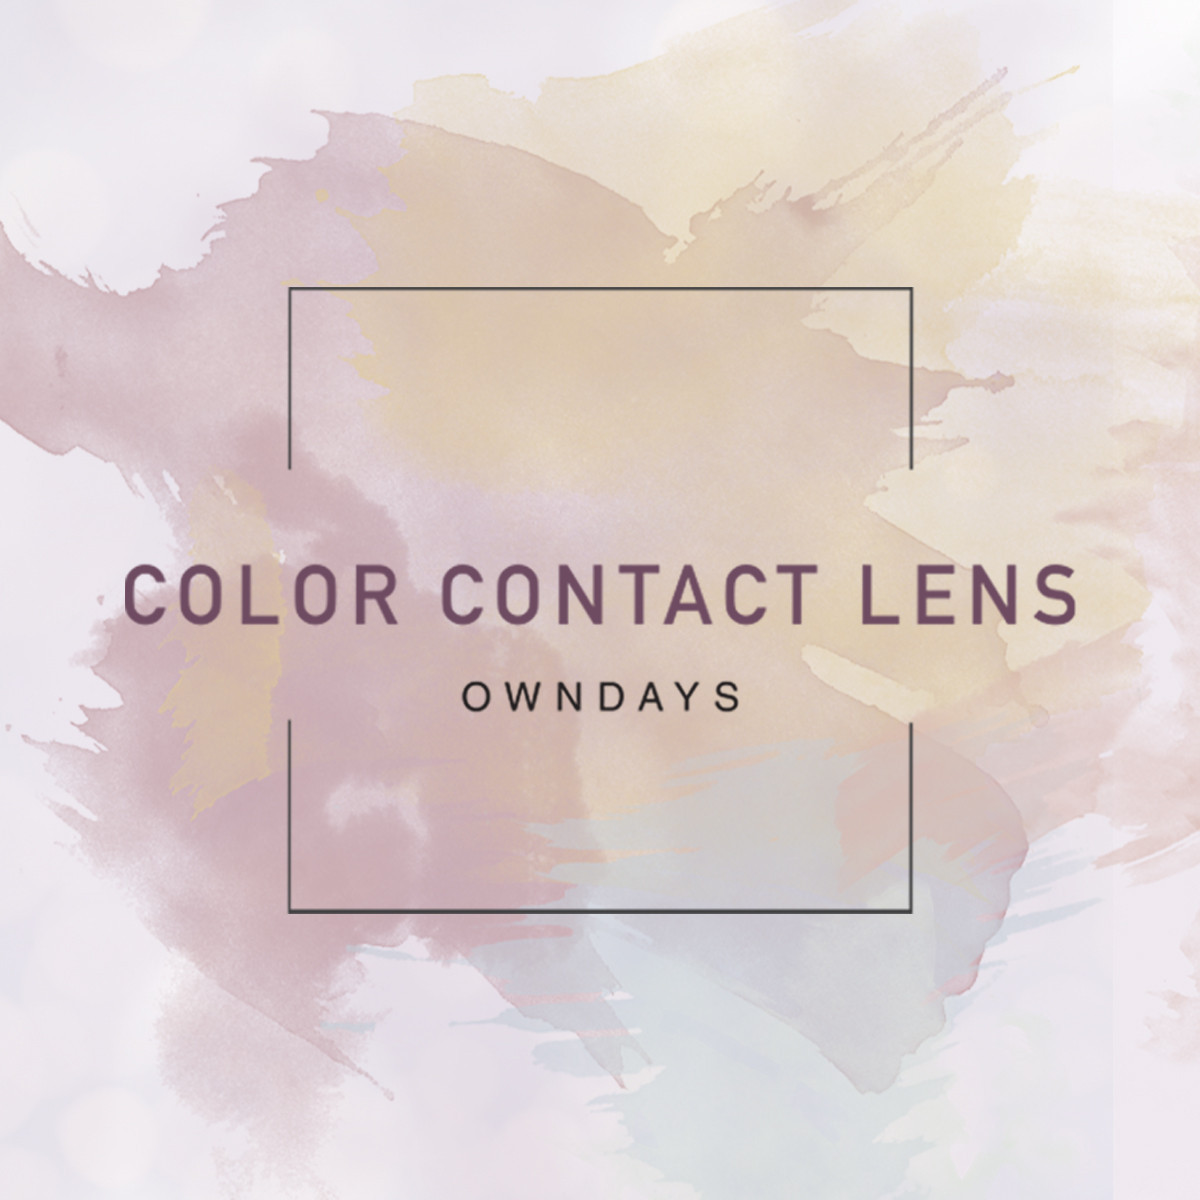 OWNDAYS COLOR CONTACT LENS